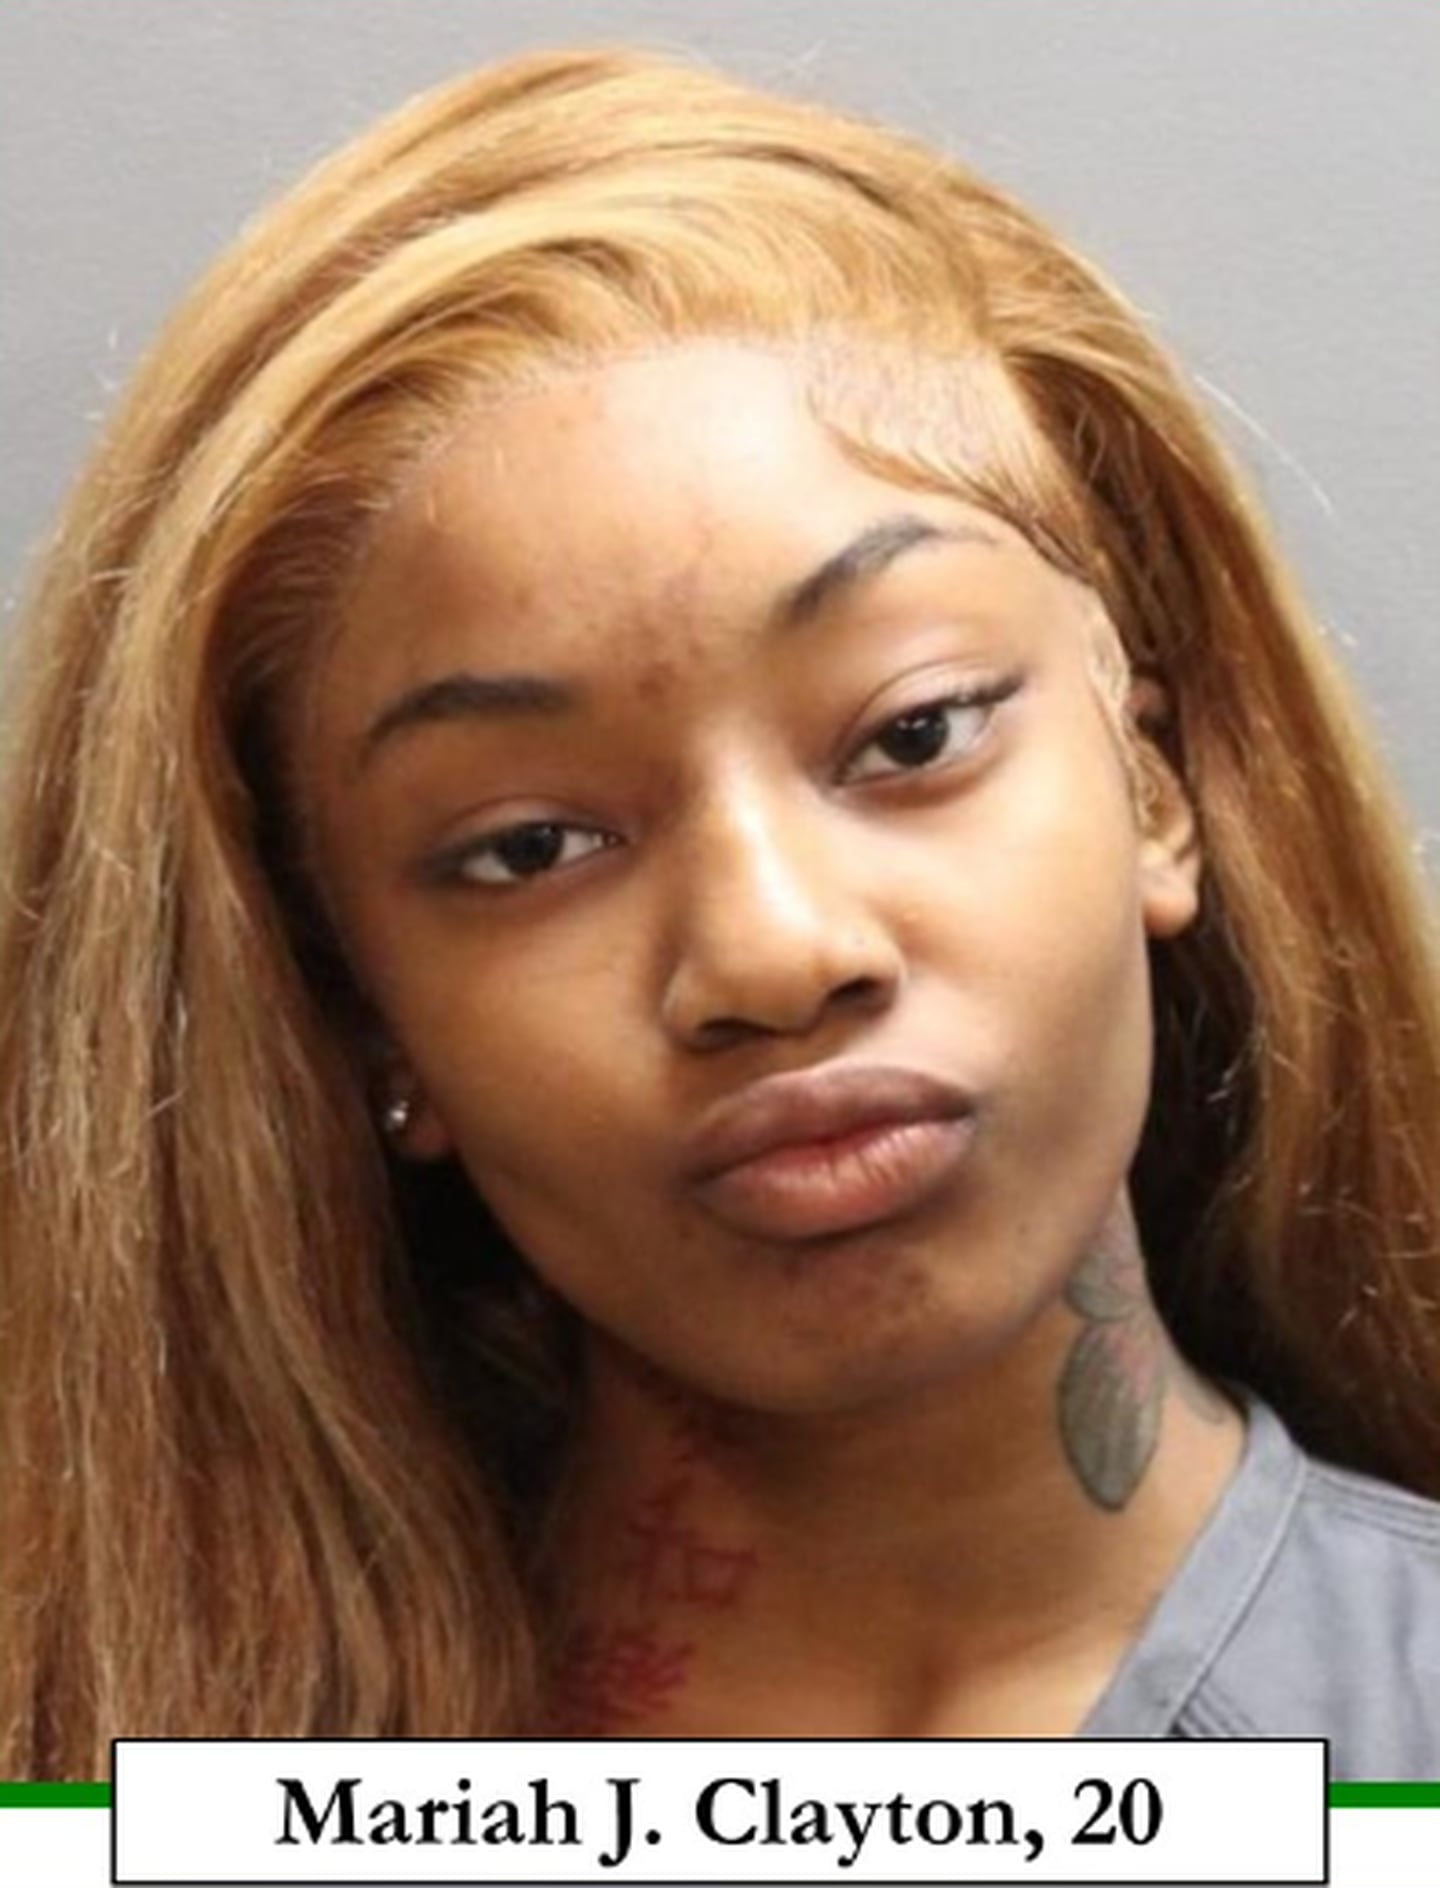 Mariah Clayton, 20, was arrested by police for manslaughter in the death of a woman back in May.